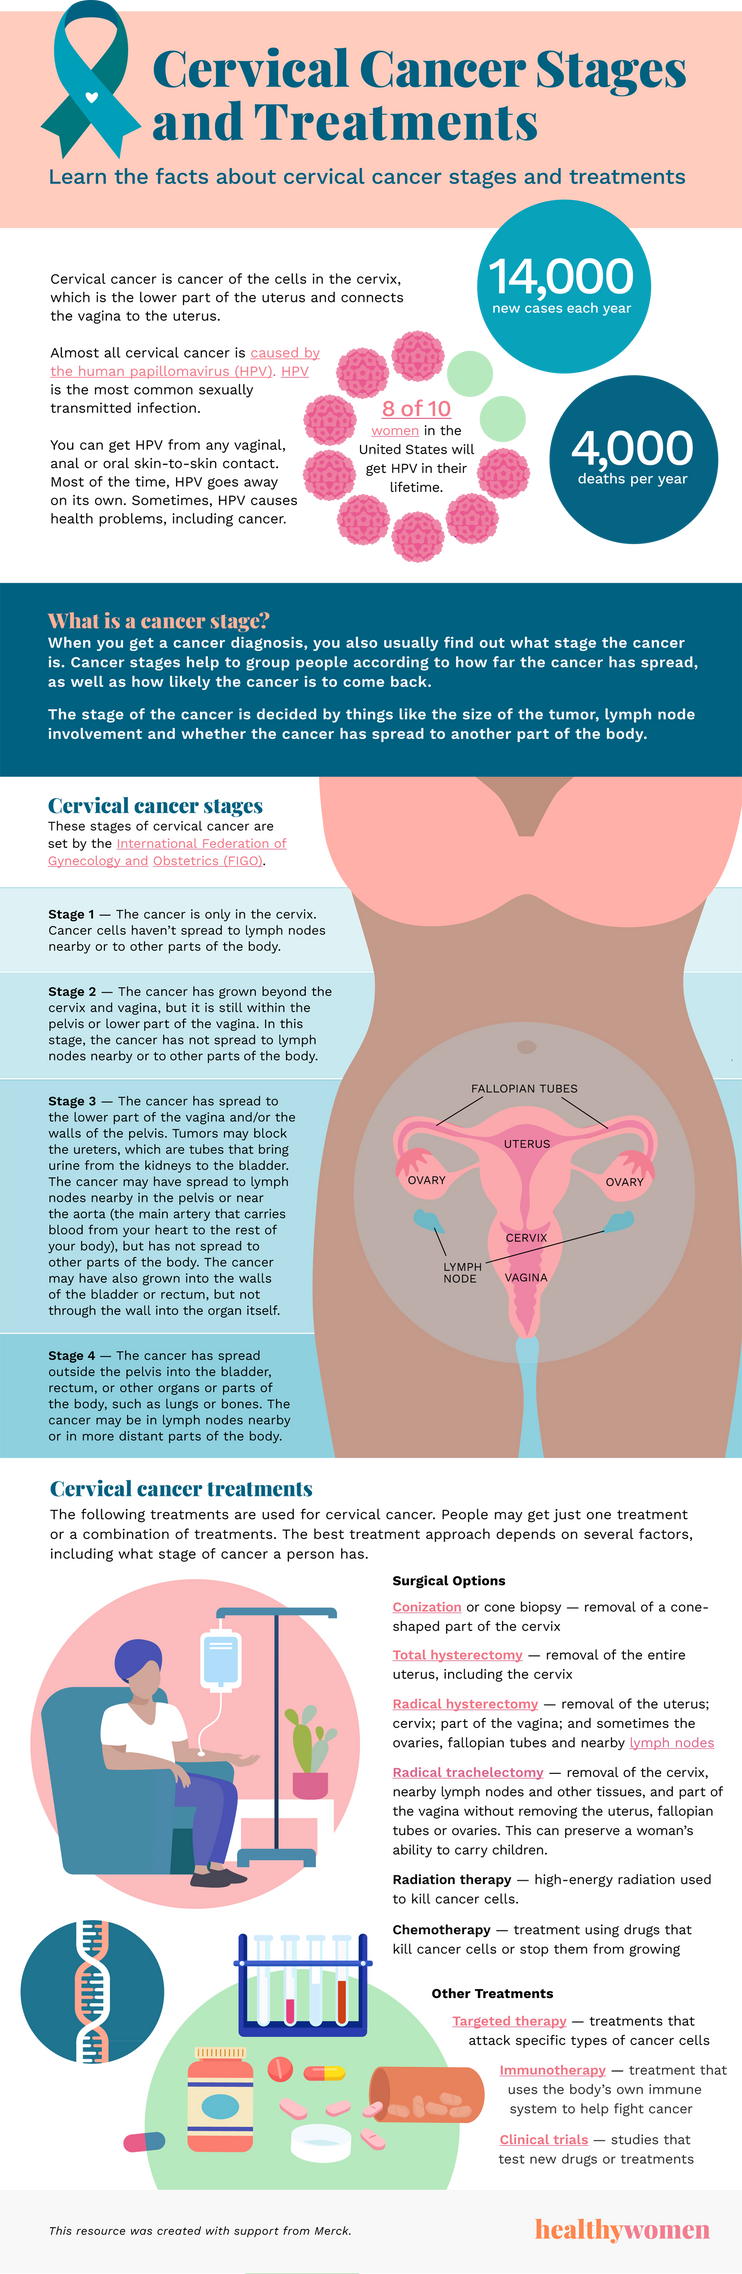 Cervical Cancer Stages and Treatments - HealthyWomen